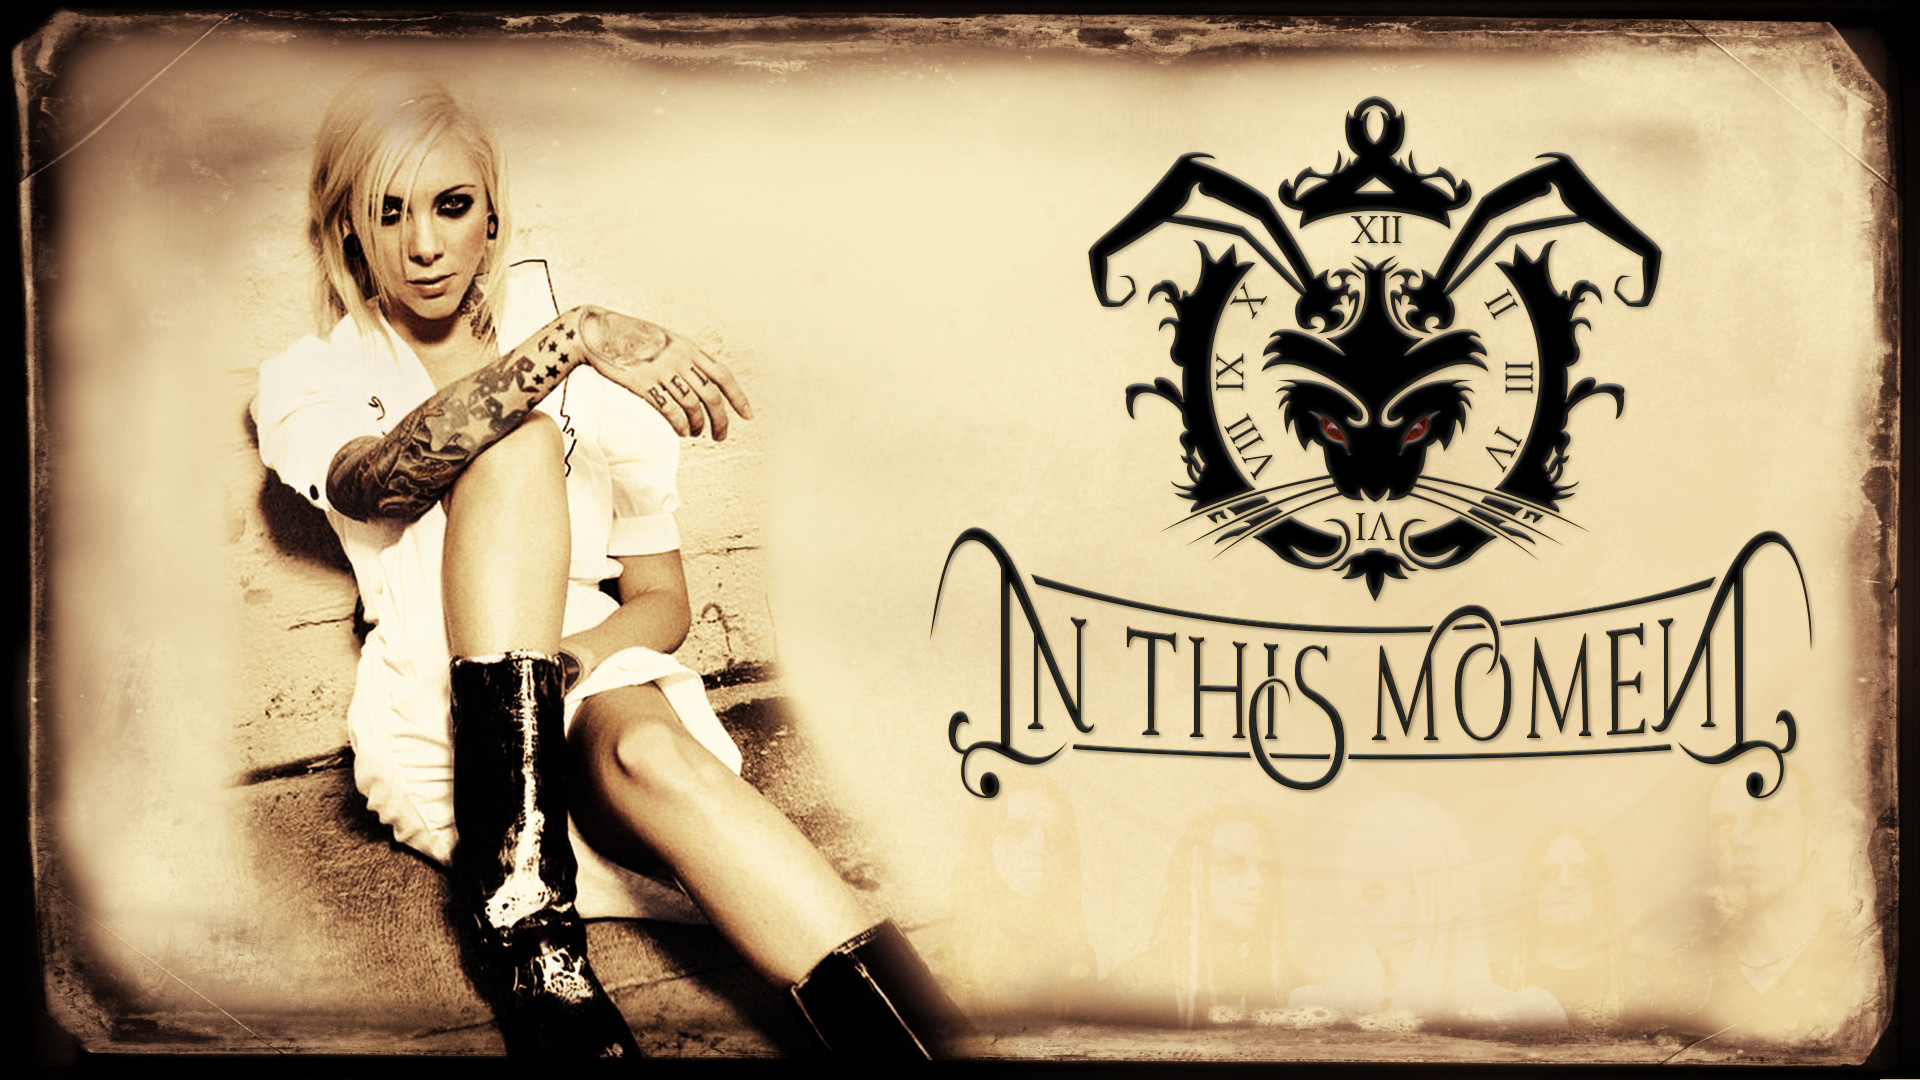 … In This Moment (Music Band) Desigm by Azazelfire